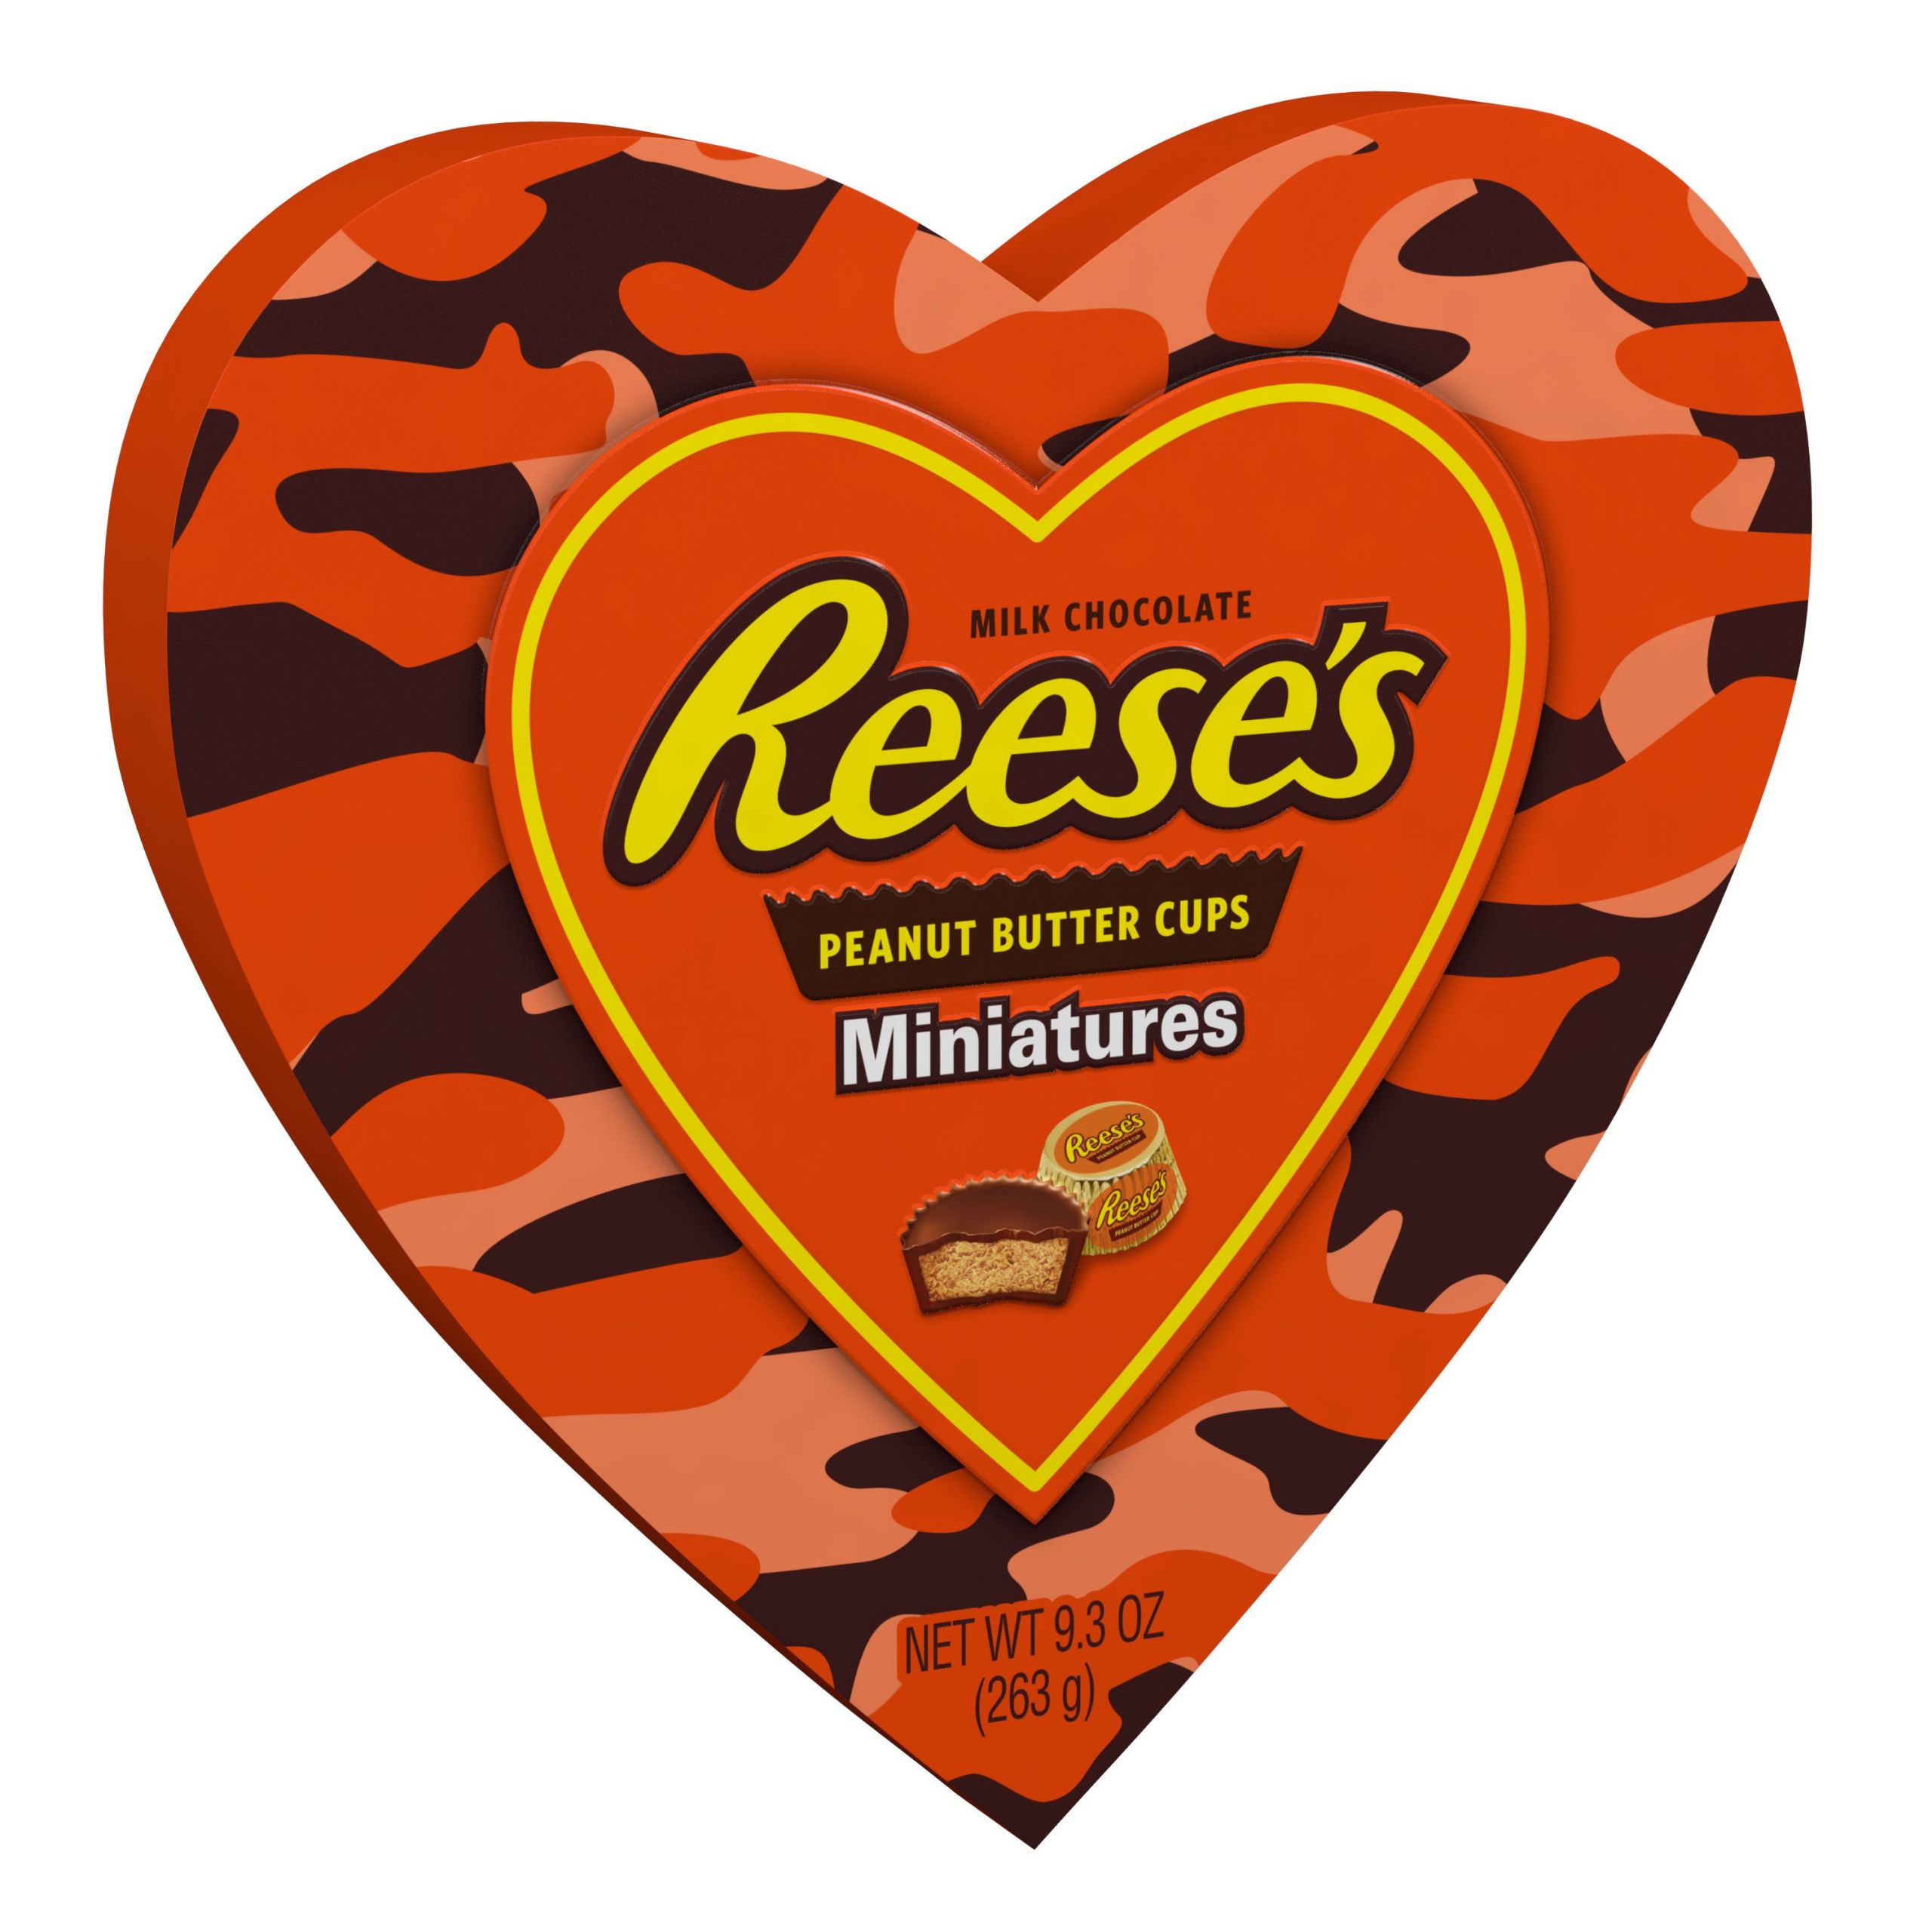 Valentines Day Candy Gift
 REESE S Miniatures Milk Chocolate Peanut Butter Cups